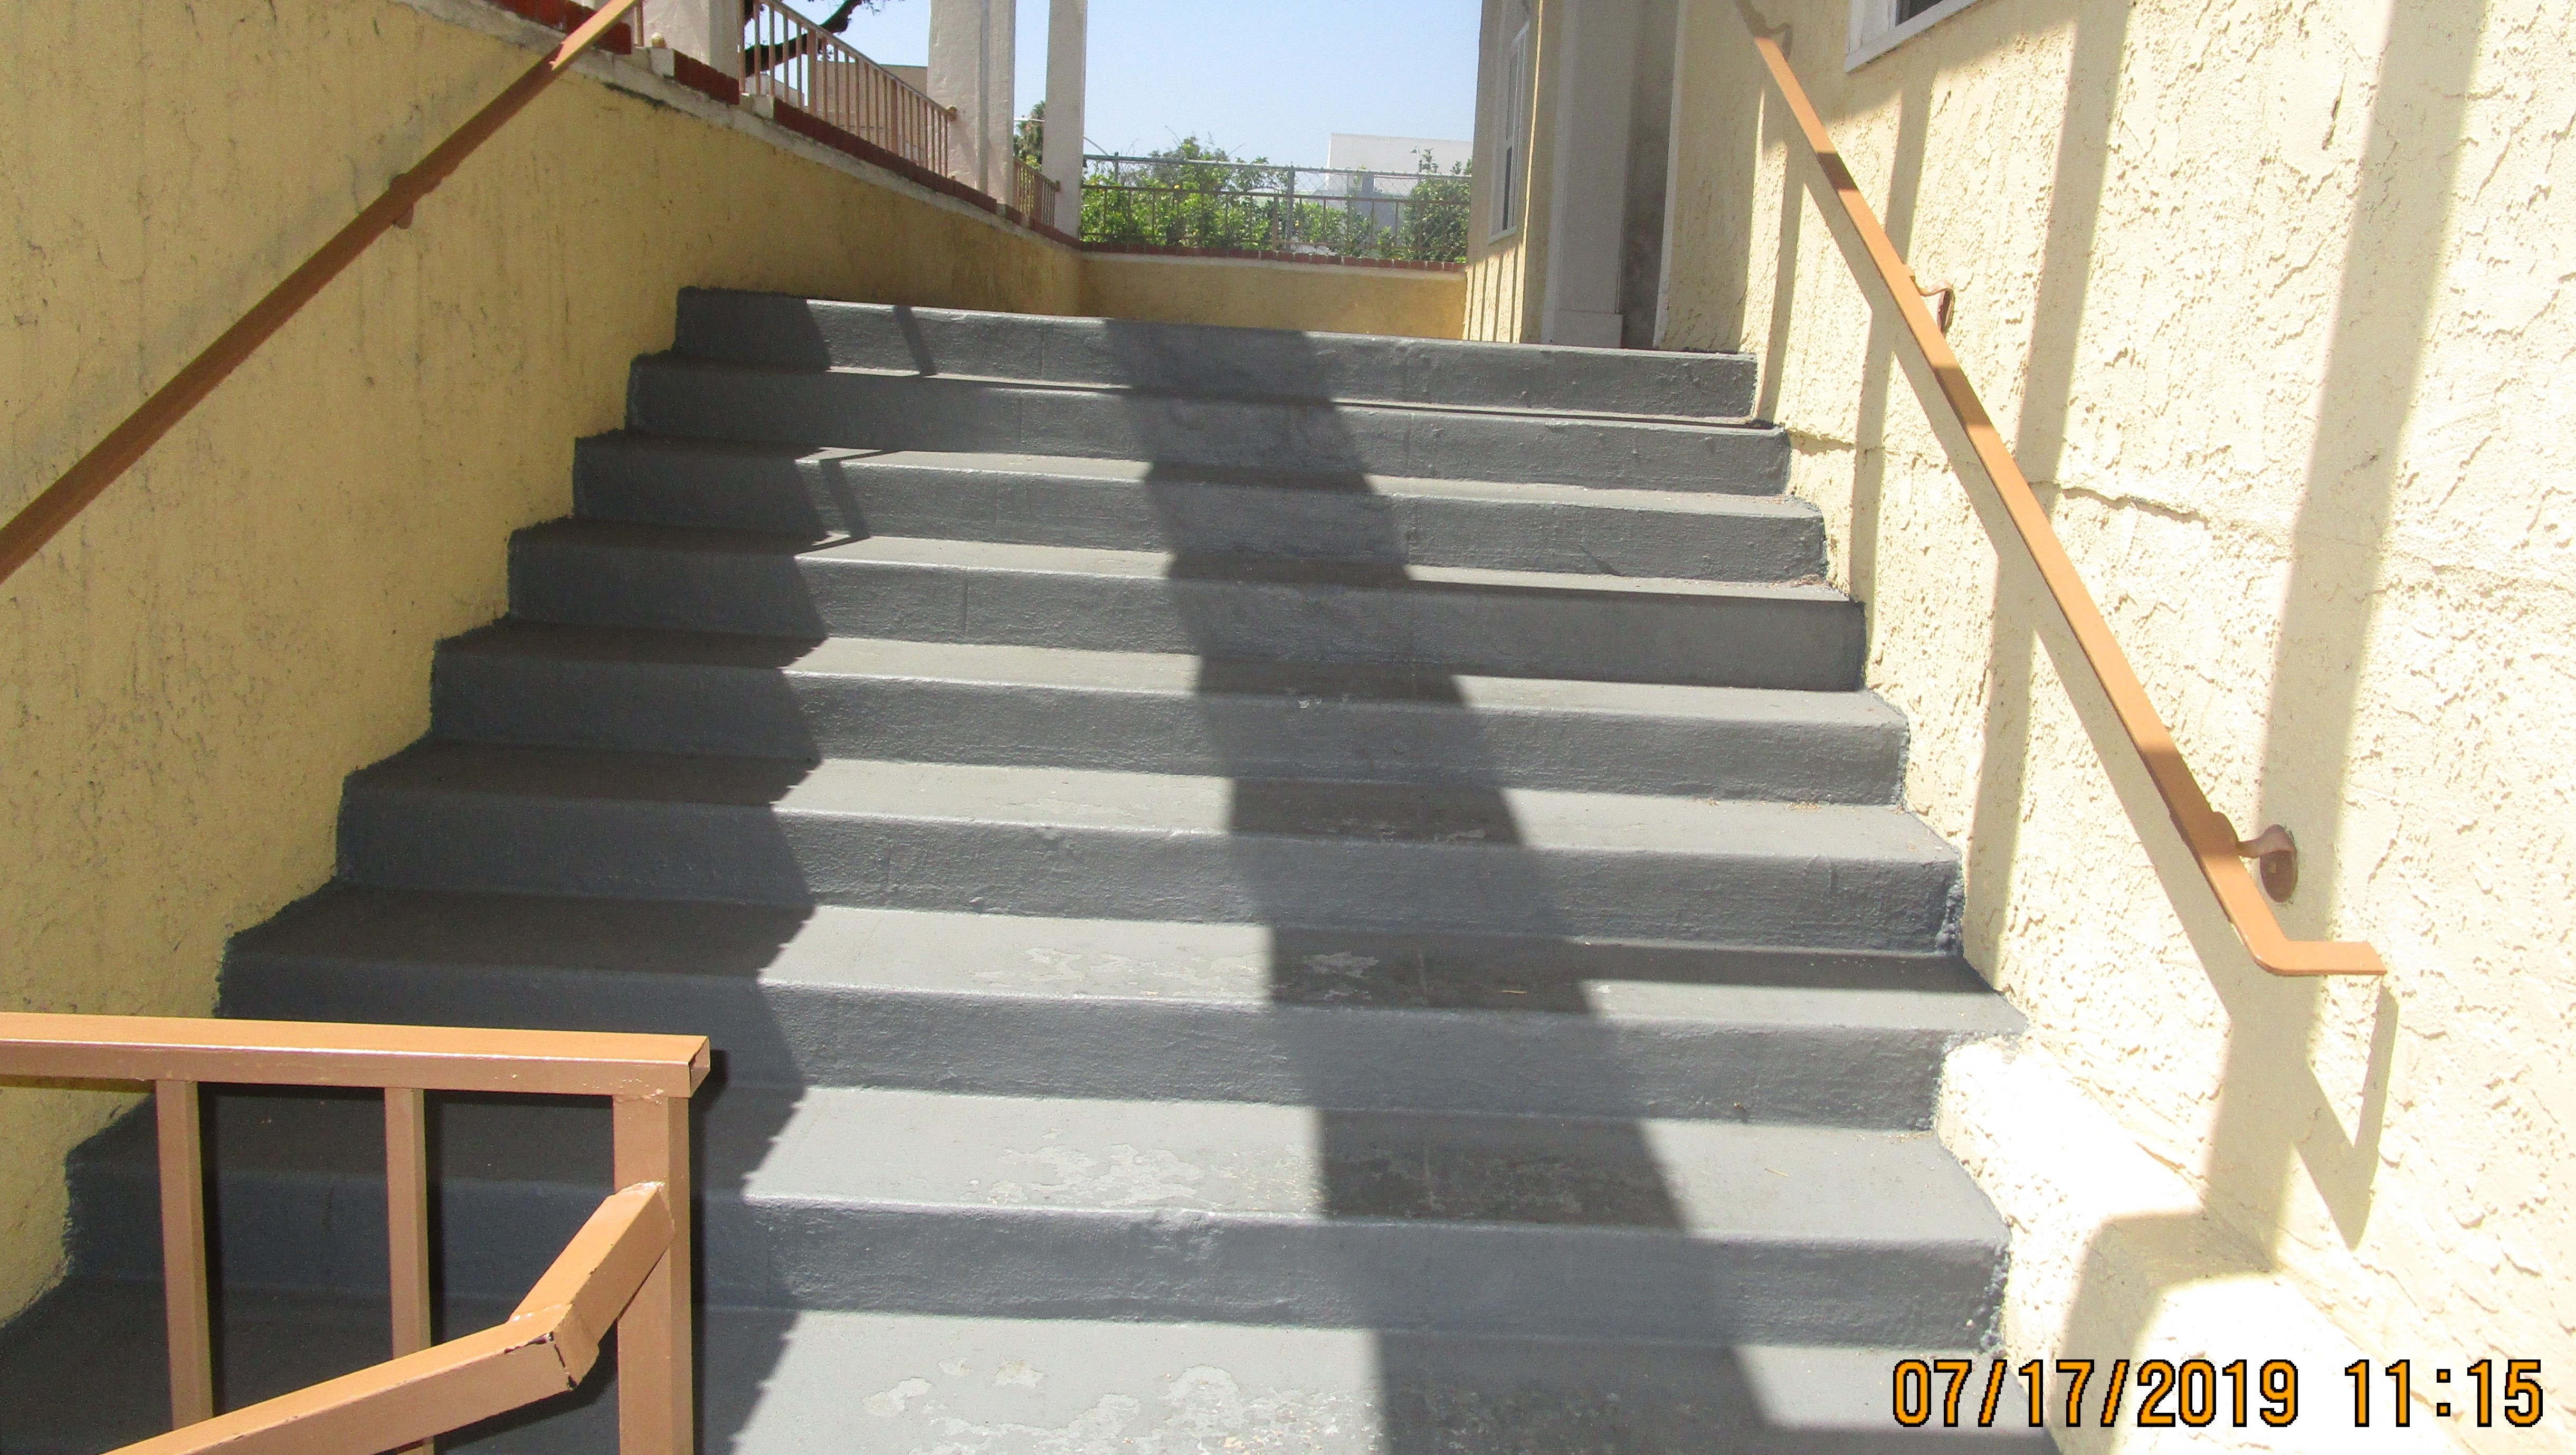 View of gray concrete stairway, handrails on each side.